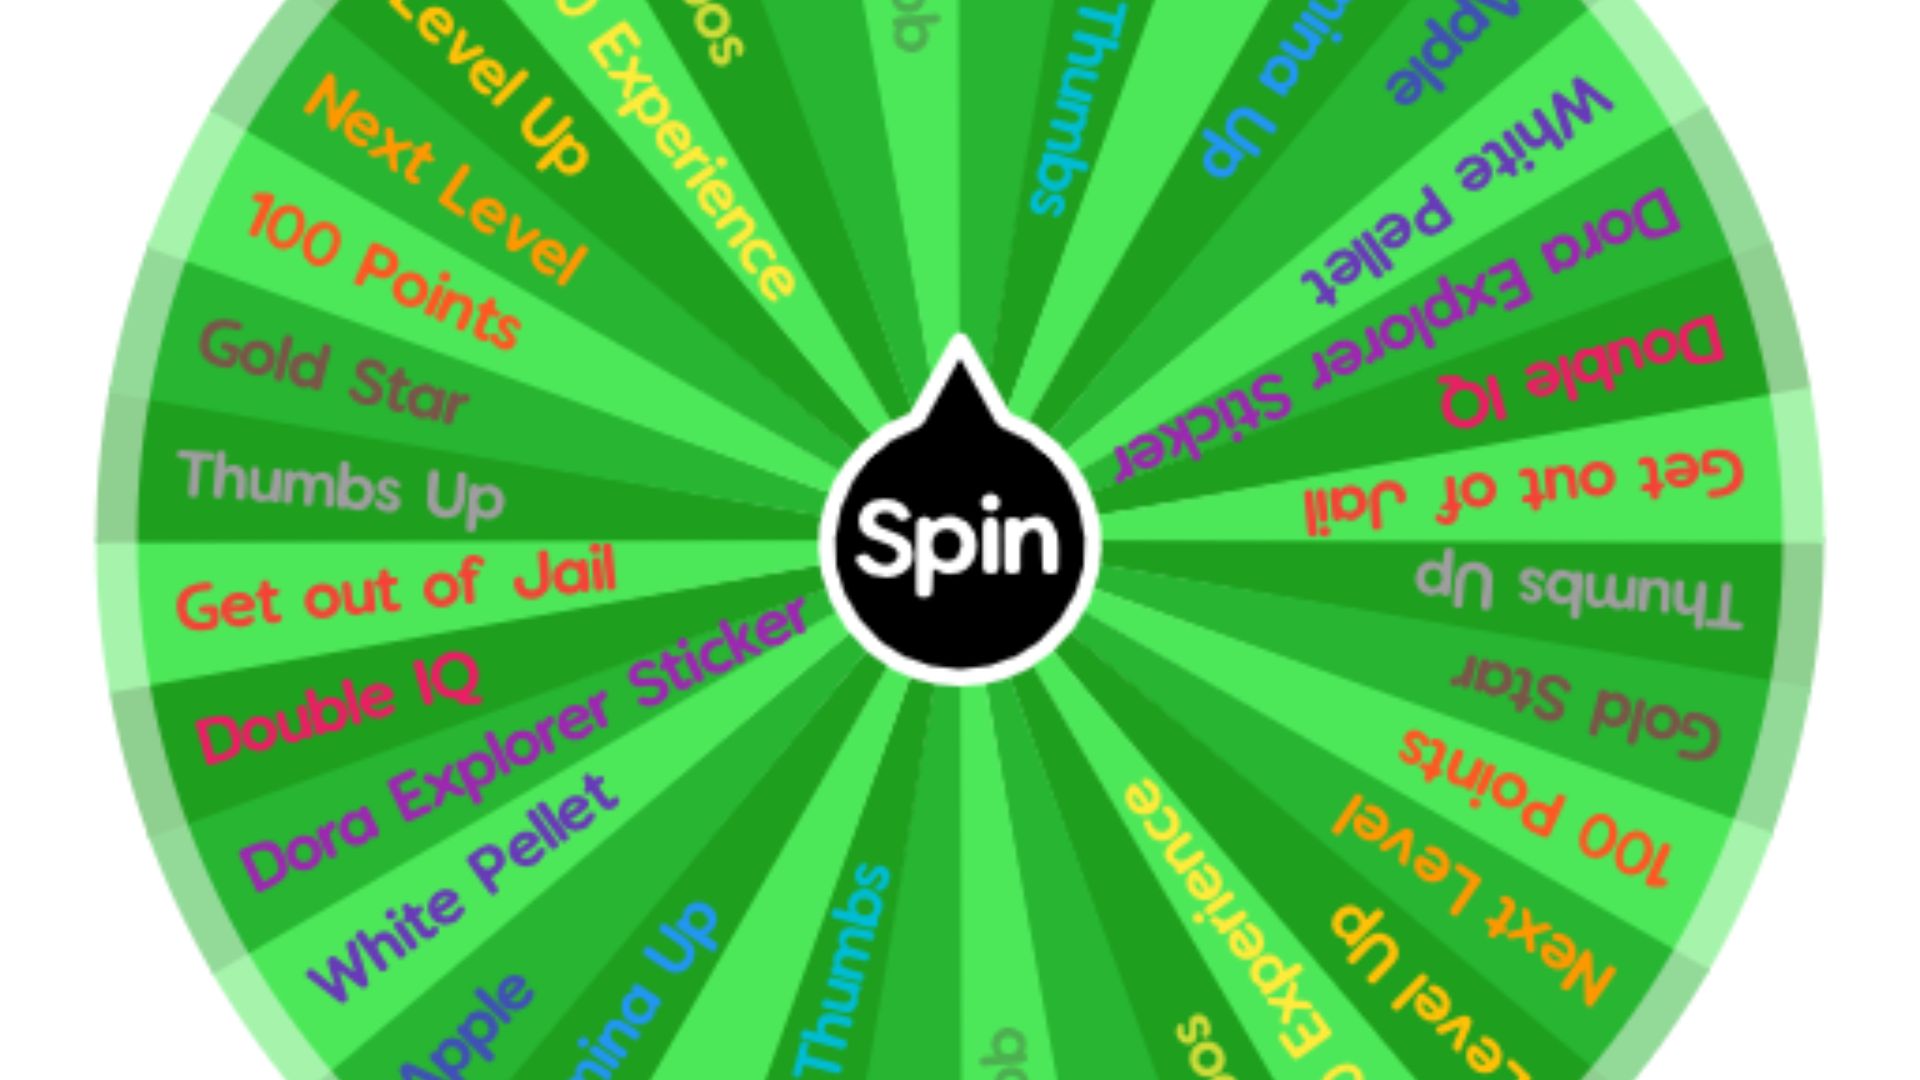 this picture shows a Spin Wheel Prizes for Customer Loyalty Programs